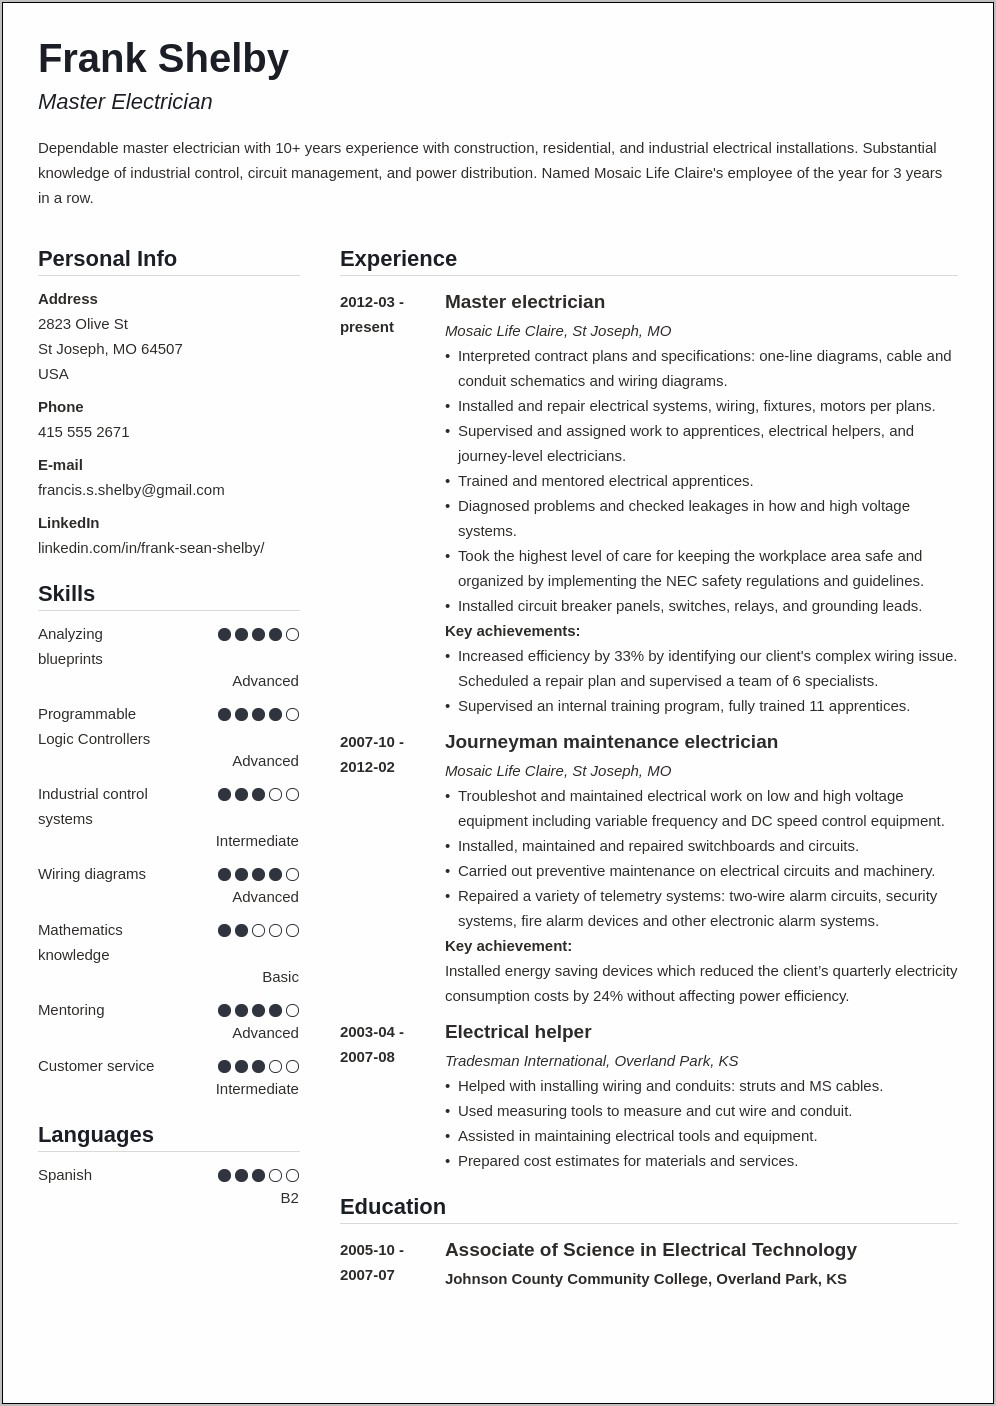 Resume Summary For A Hard Worker